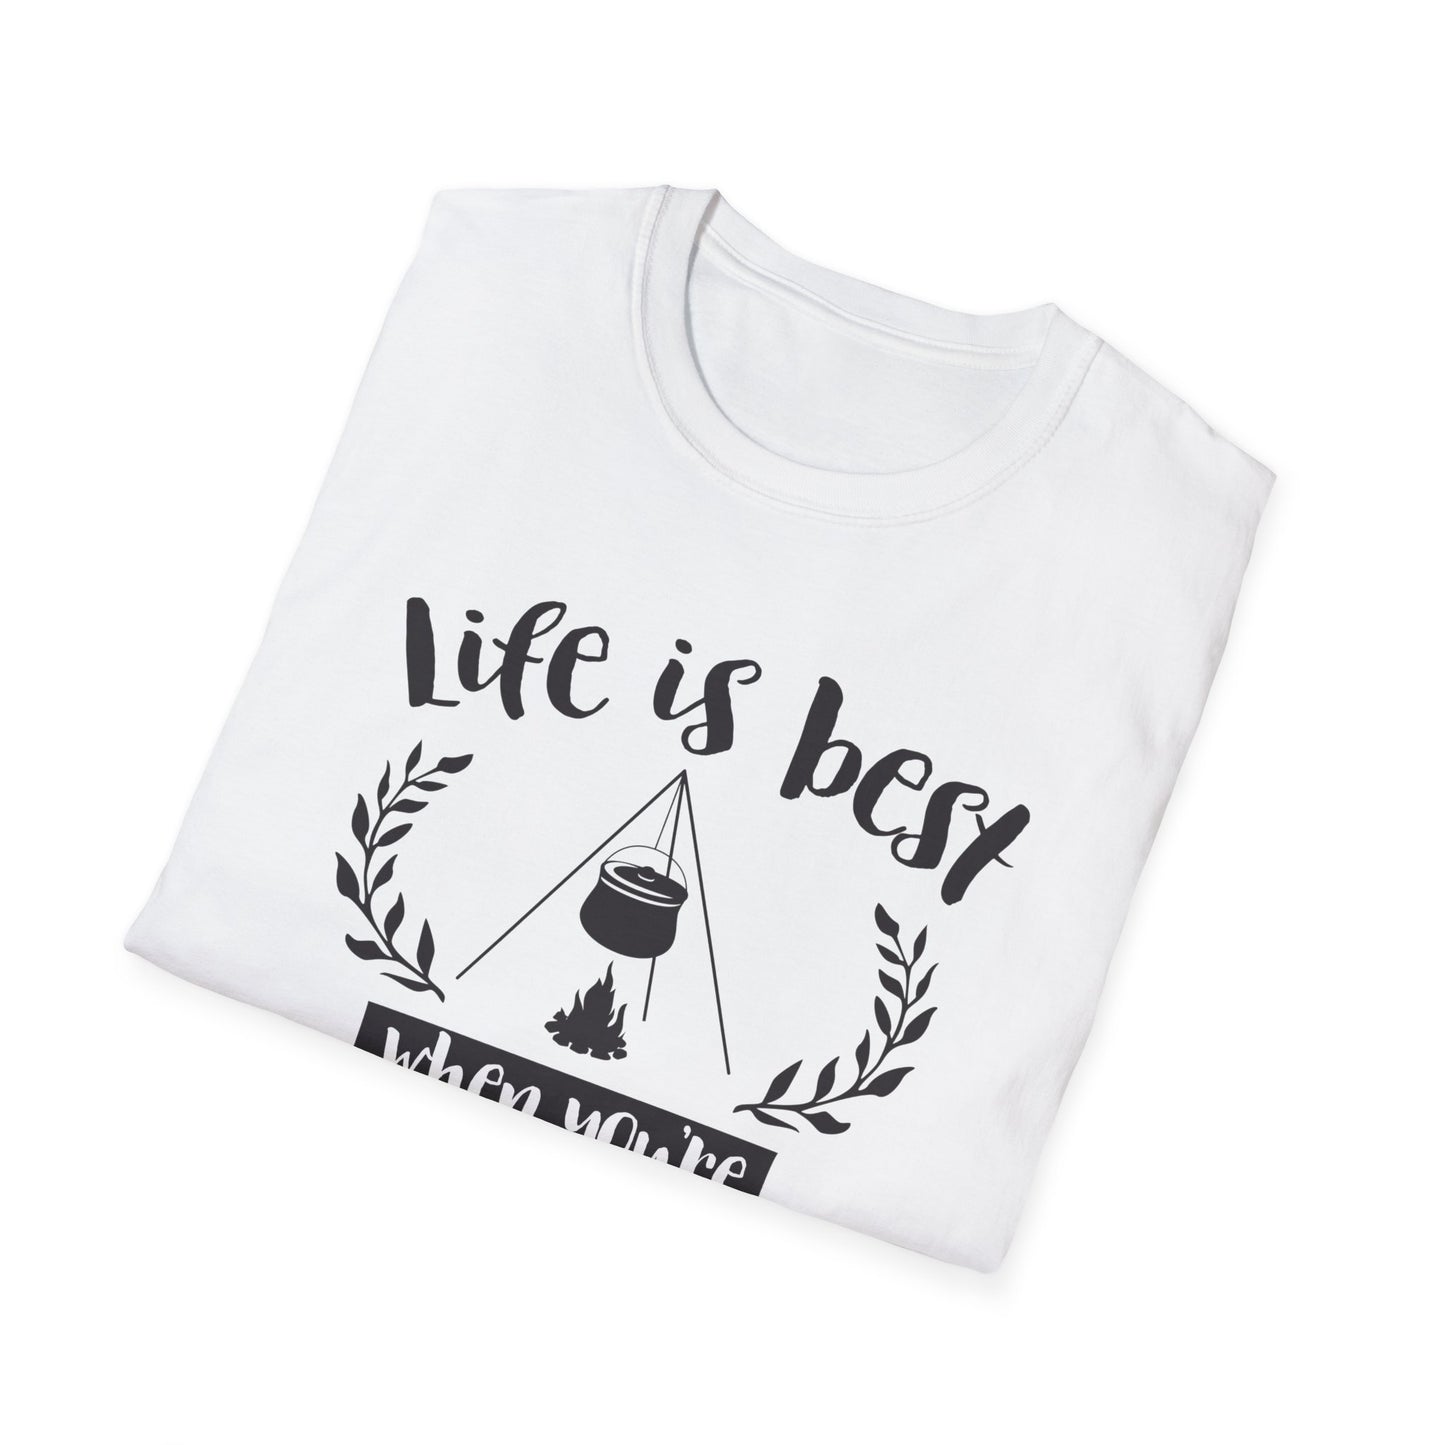 Discover Joy with Our Exclusive 'Life is Best When You are Campaign' T-Shirt